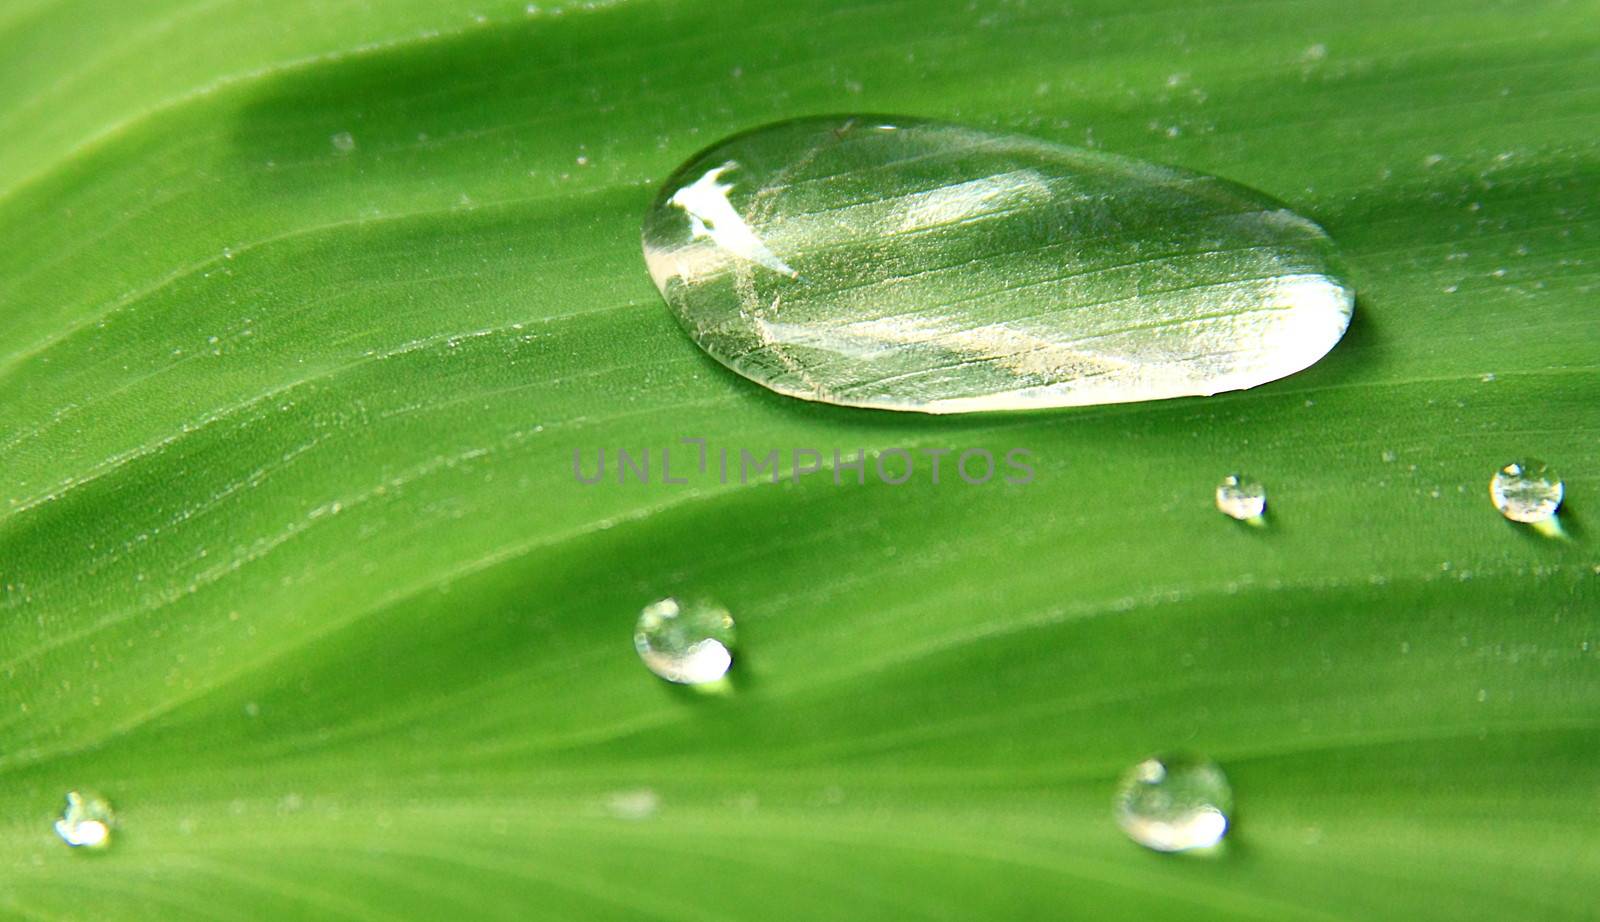 drop on a green leaf by selinsmo